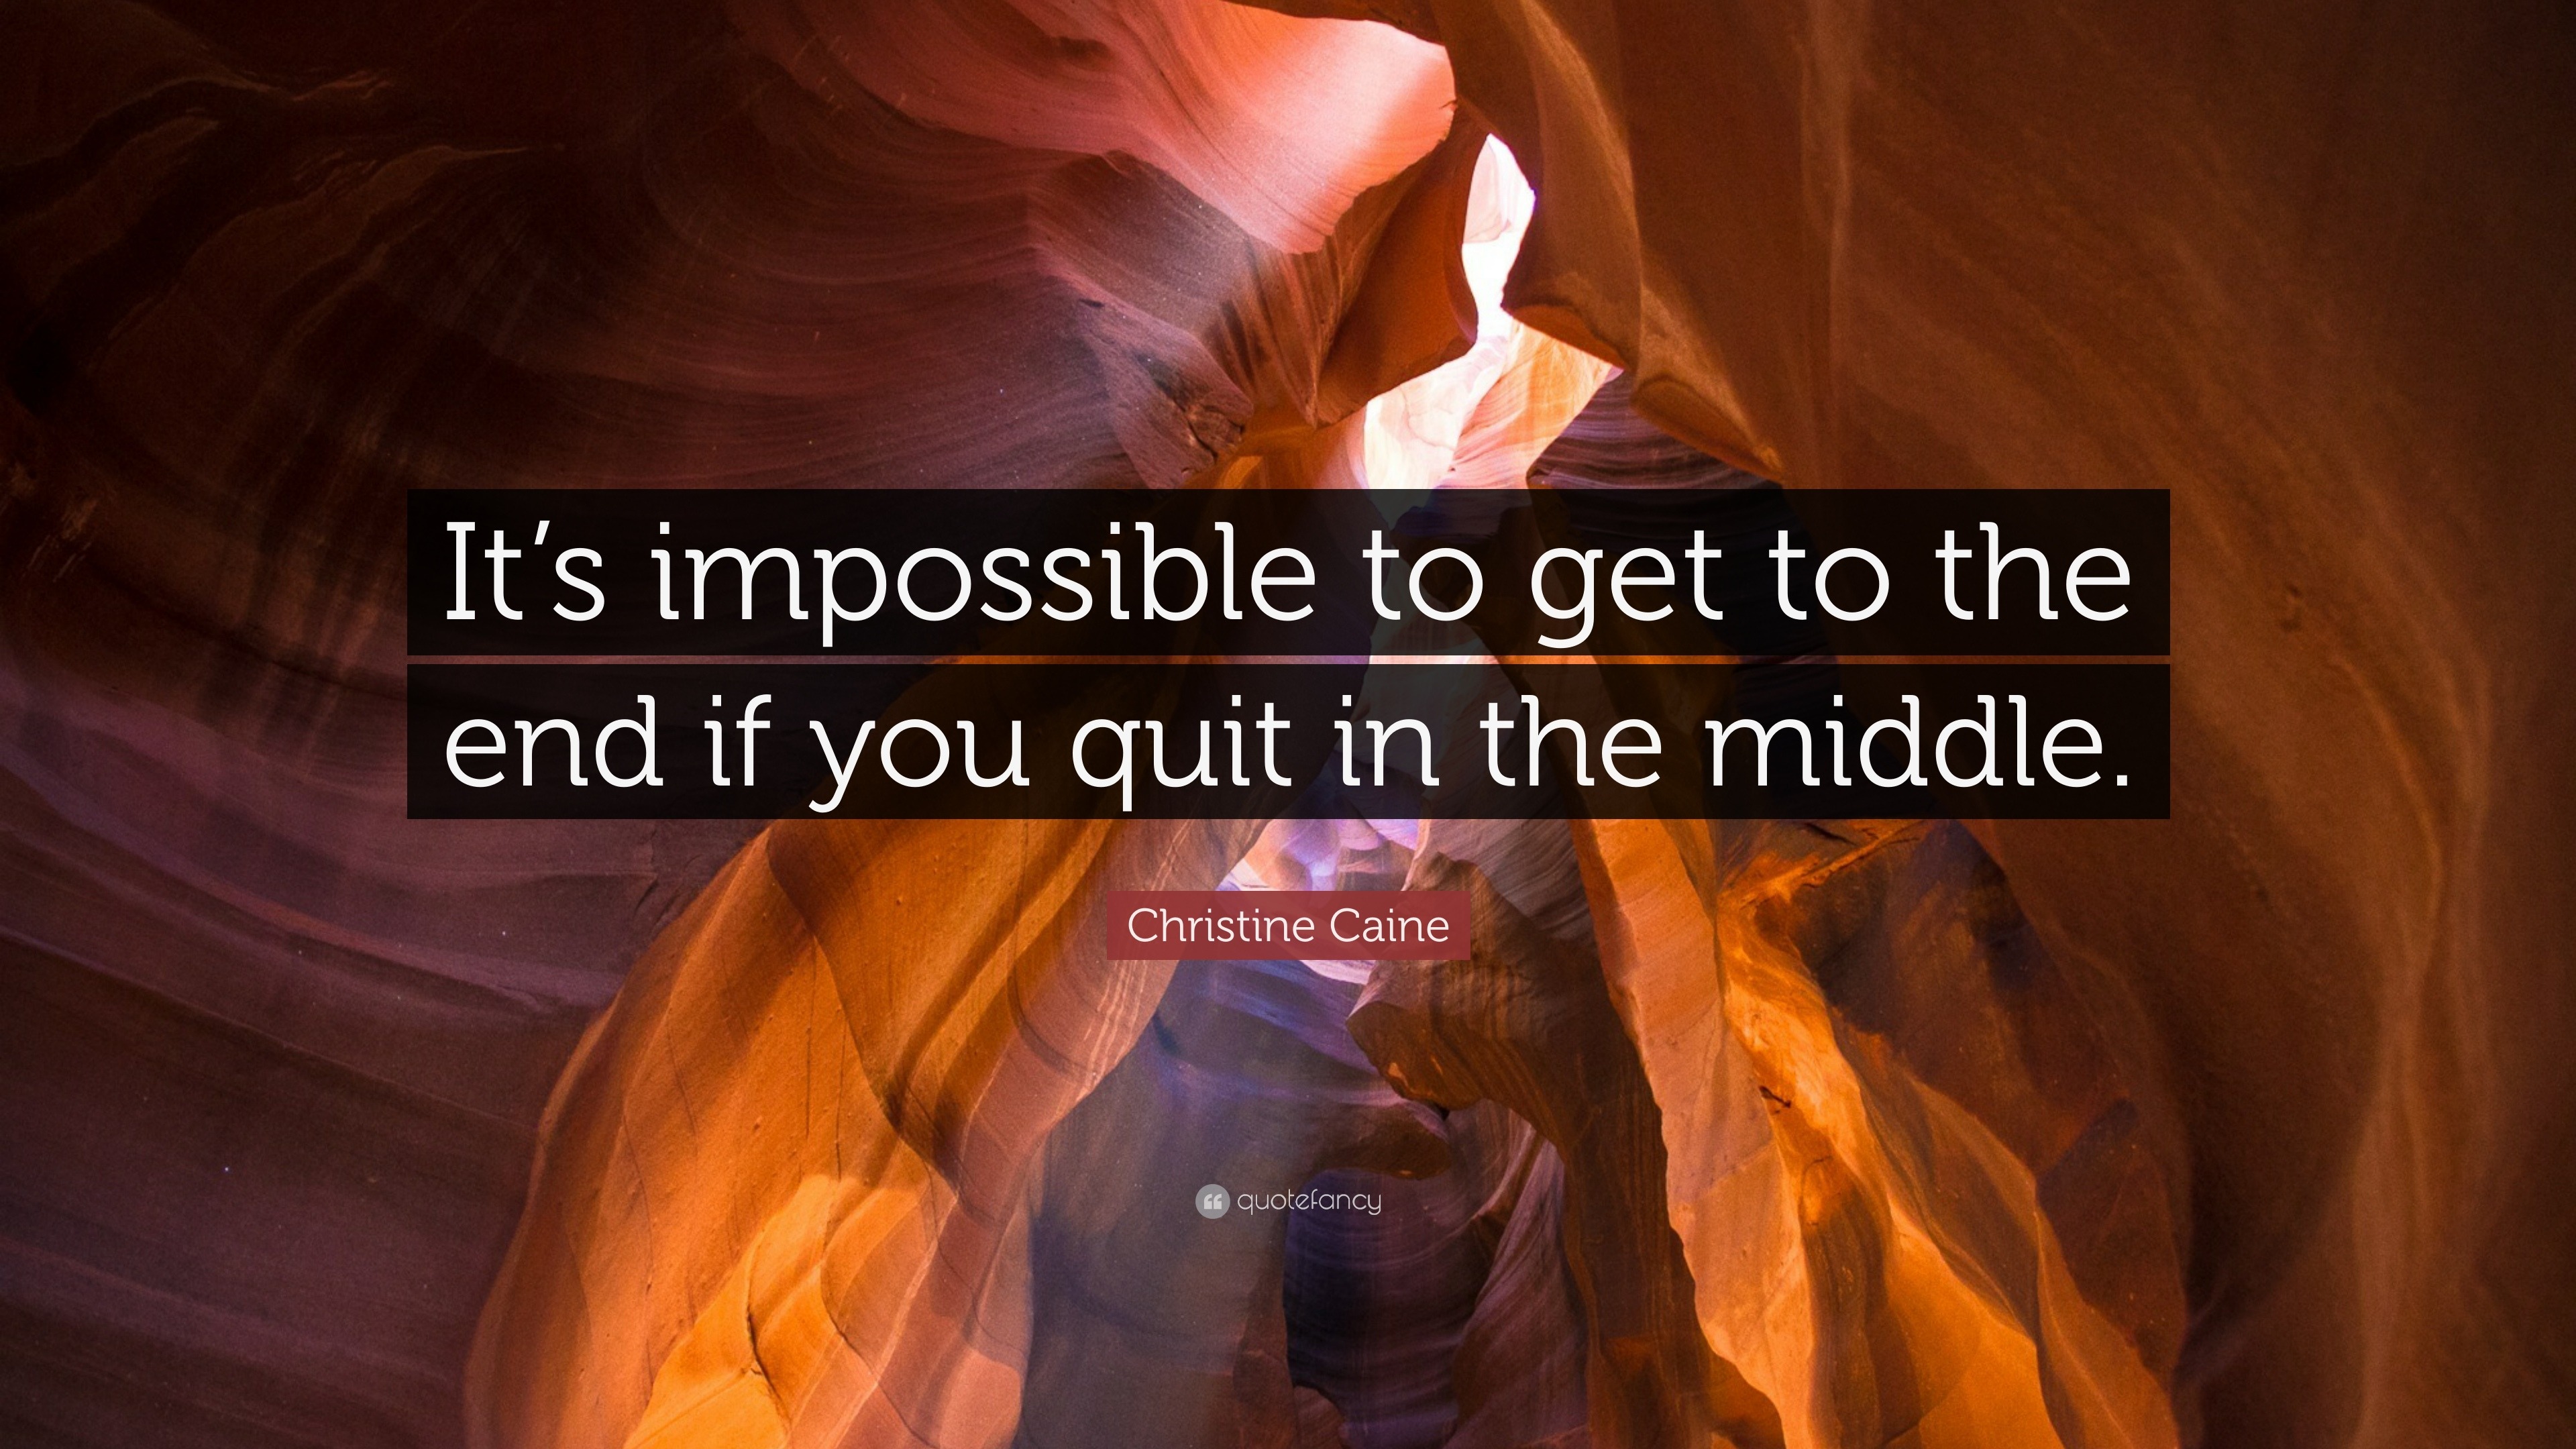 Christine Caine Quote: “It’s impossible to get to the end if you quit ...